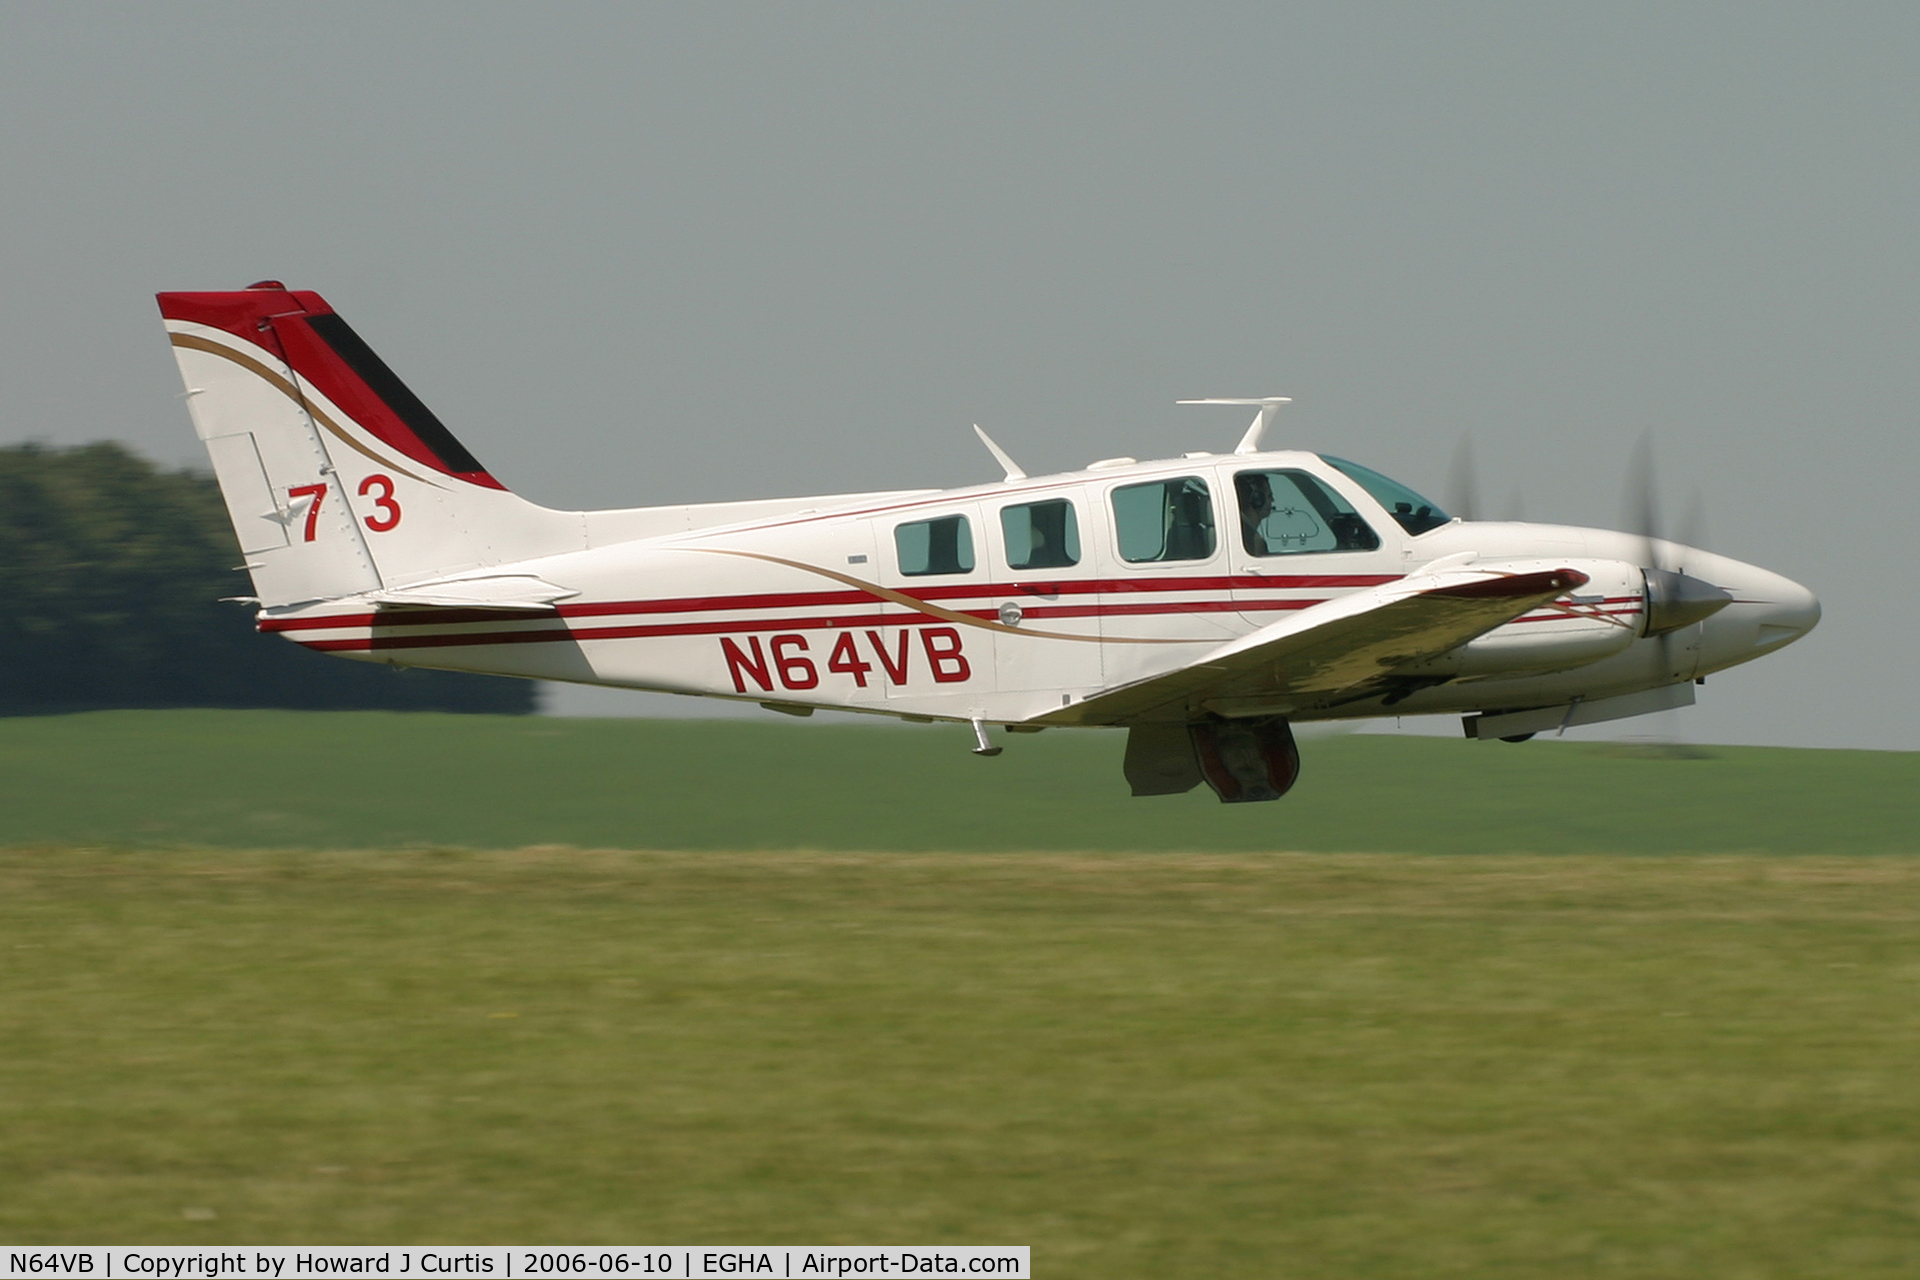 N64VB, 1973 Beech 58 Baron C/N TH-305, Race number 73, at the Dorset Air Races. Gear up, Baron down!